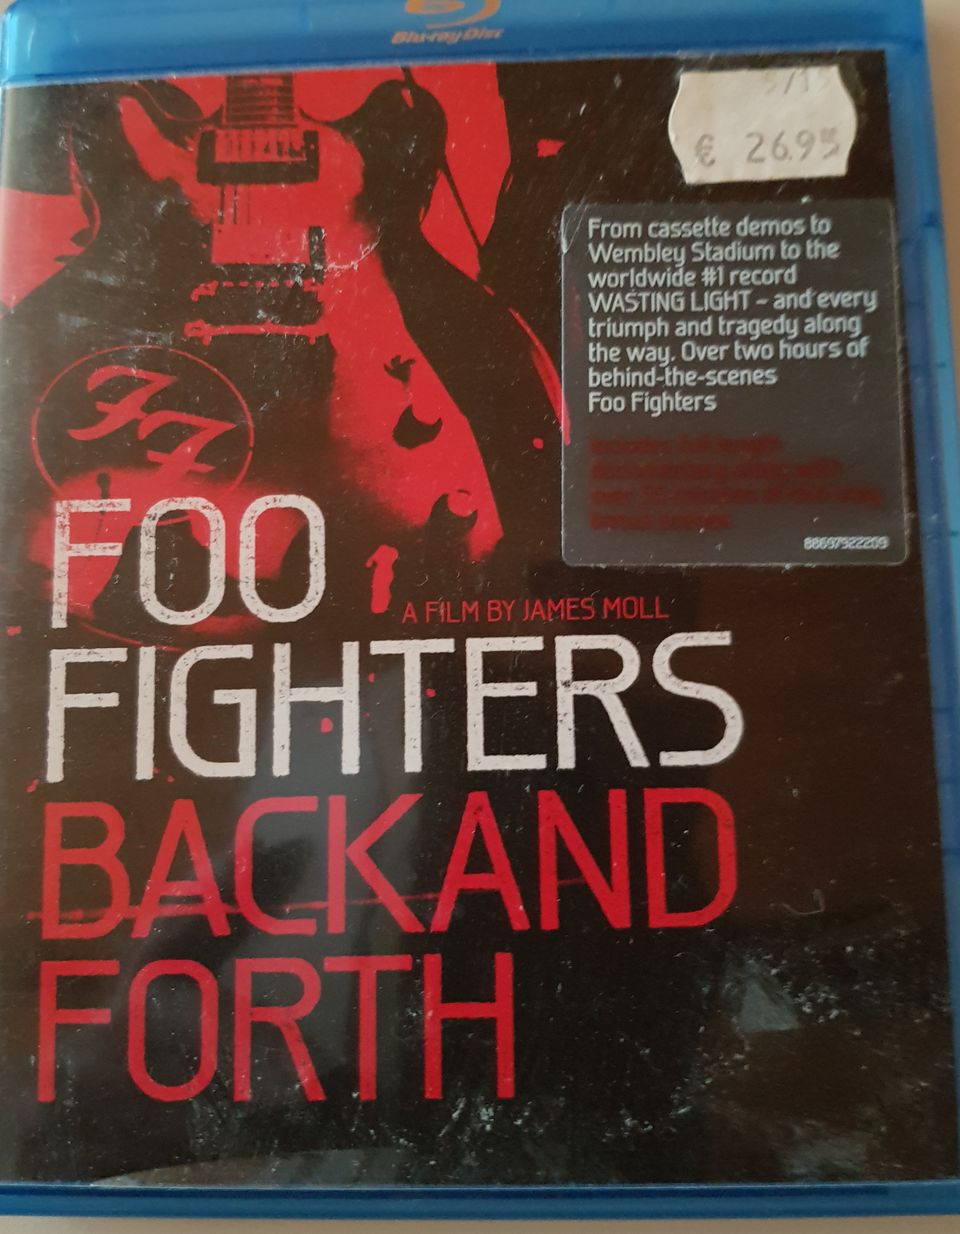 Foo Fighters / Back and forth